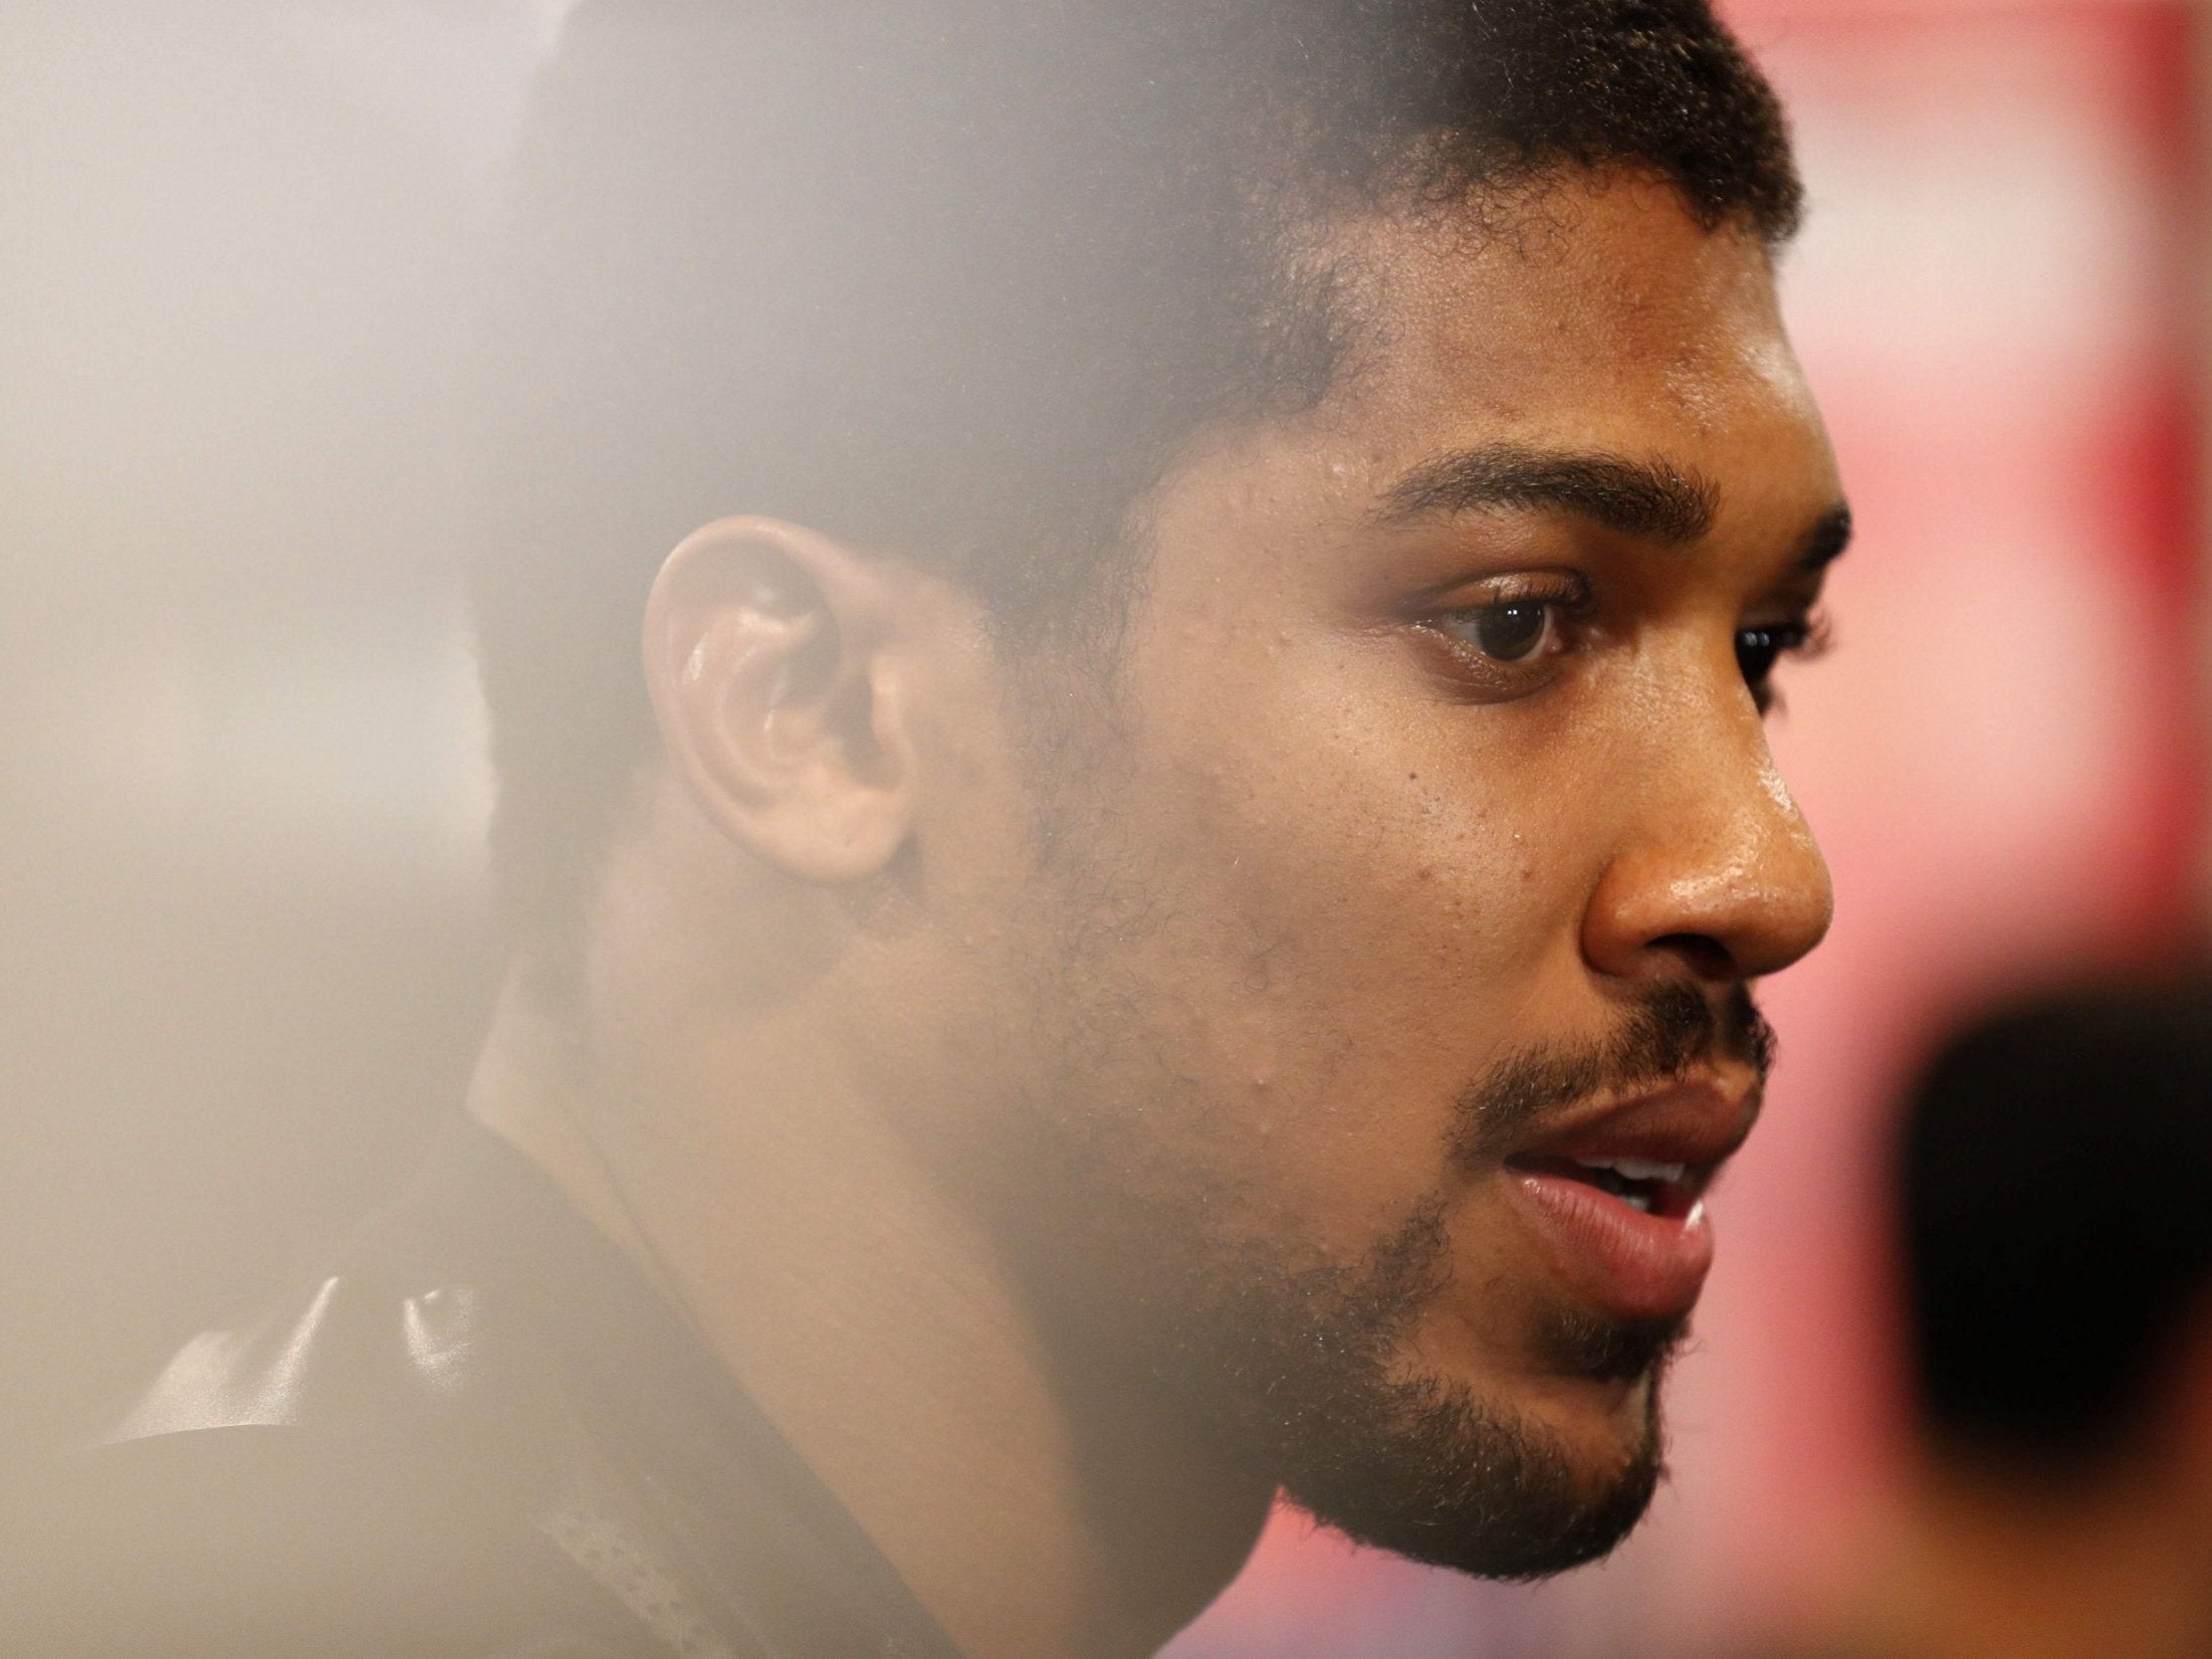 Anthony Joshua during his pre-fight public workout this week (AFP/Getty Images)